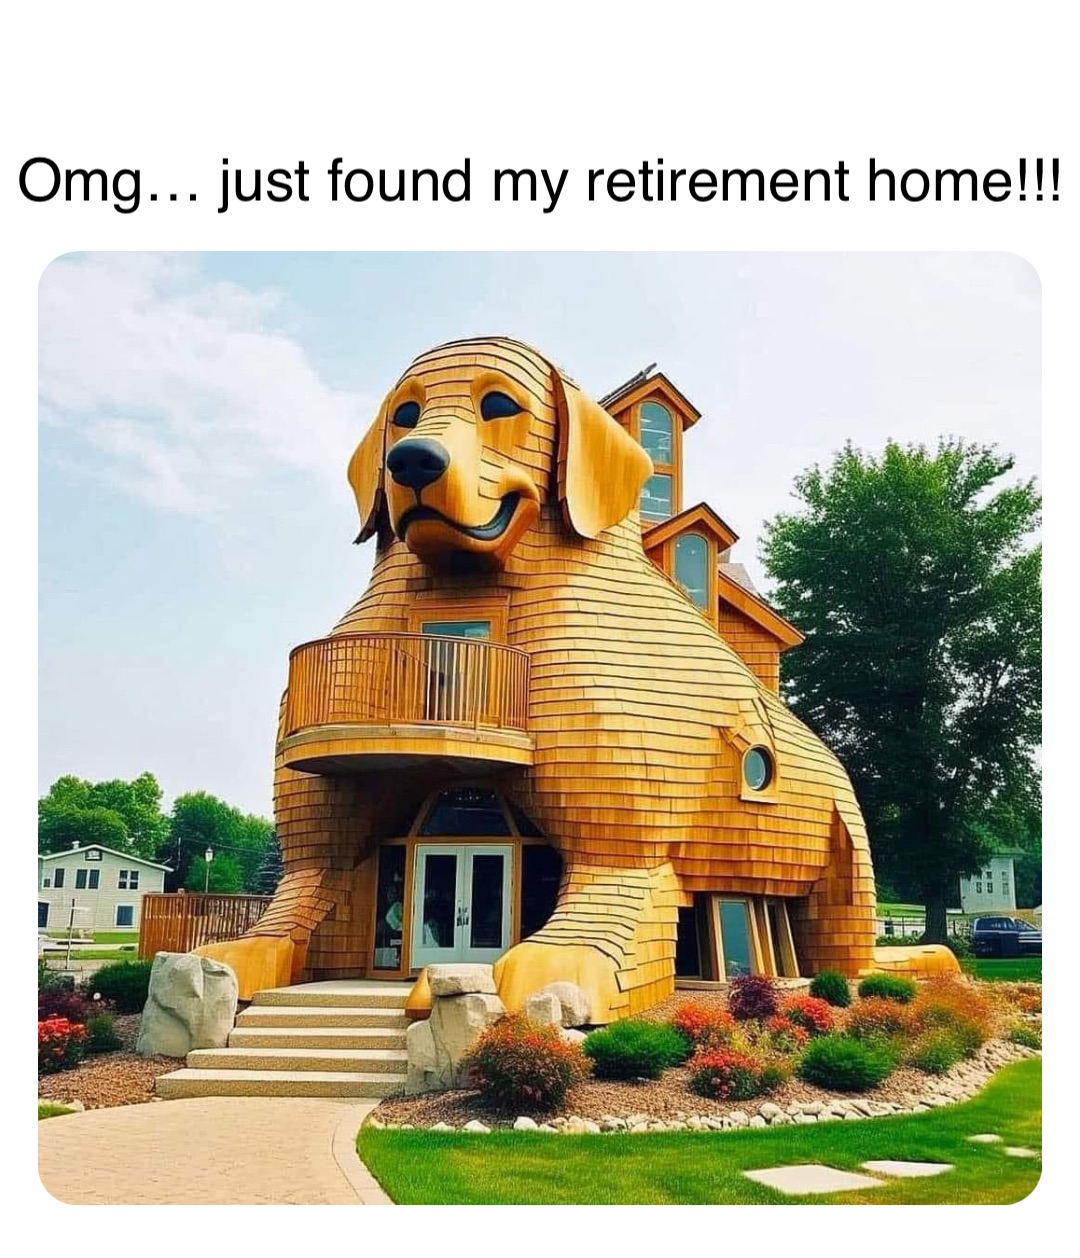 Double tap to edit Omg… just found my retirement home!!!